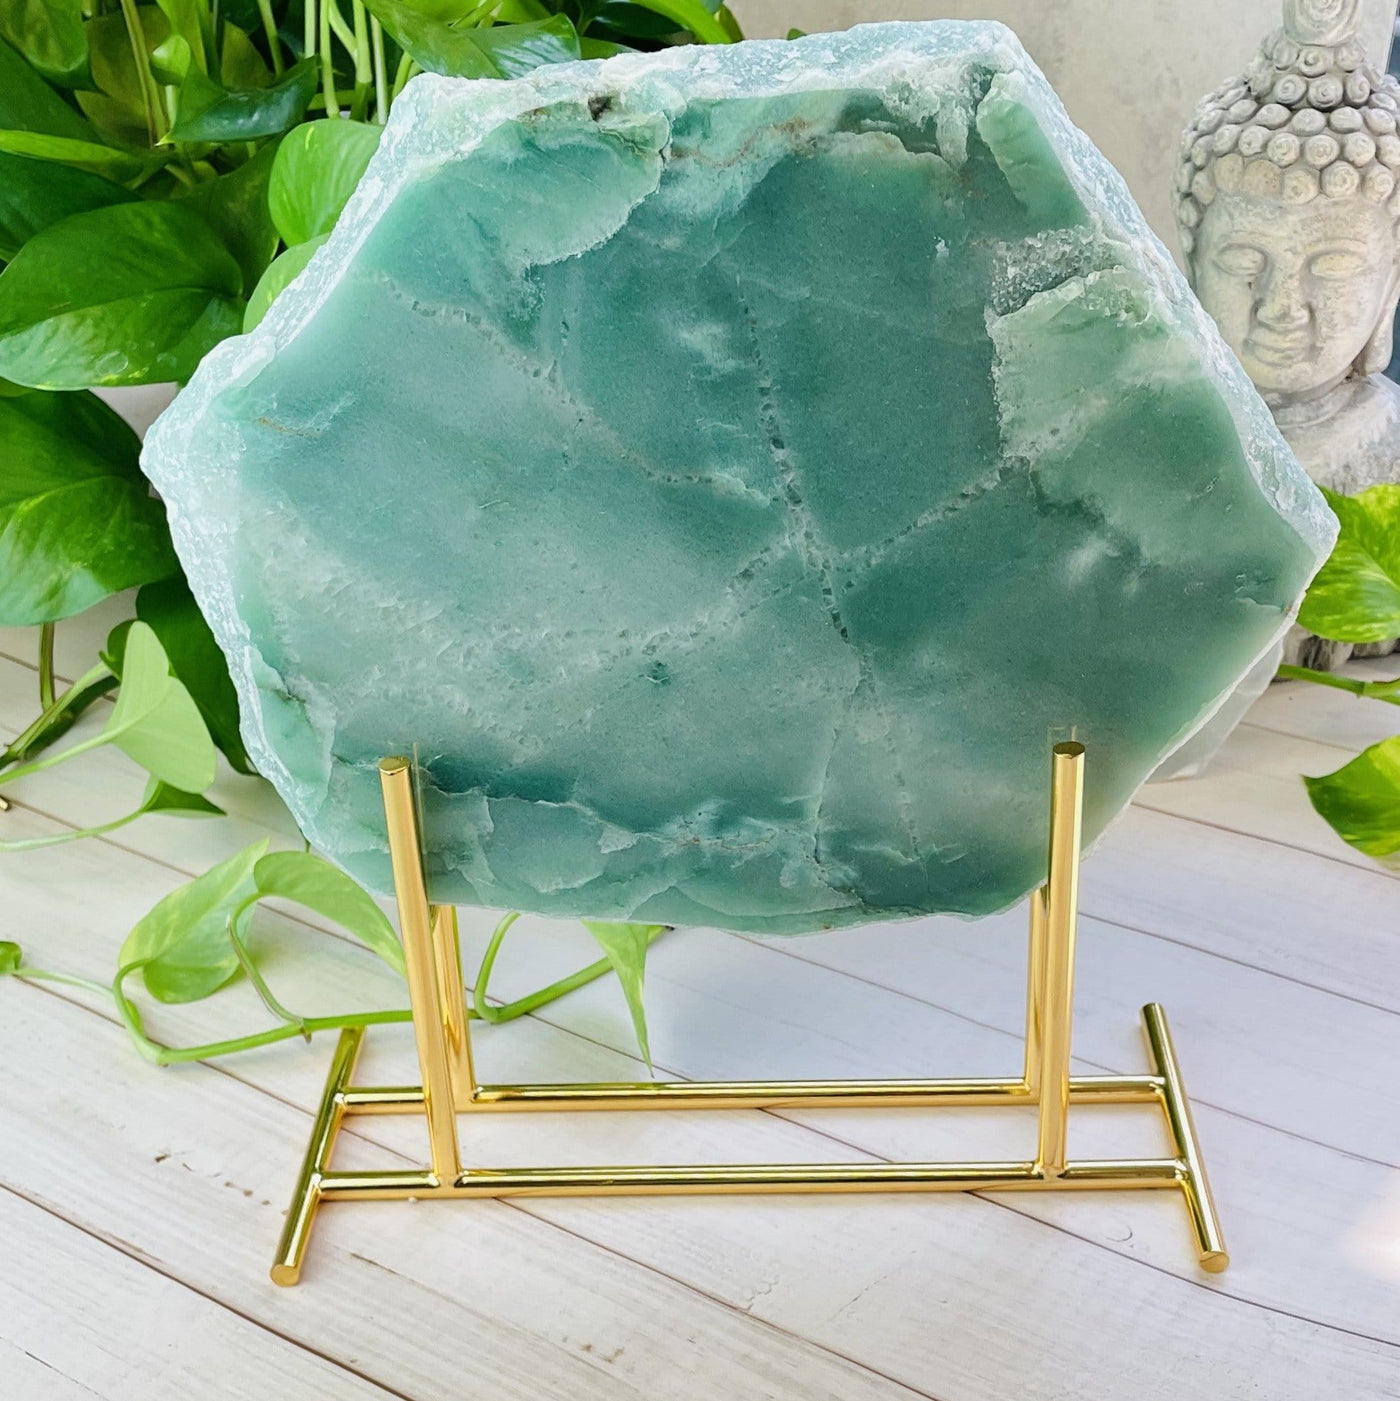 Display Stand Gold Color With Aventurine Platter on Wooden Background.